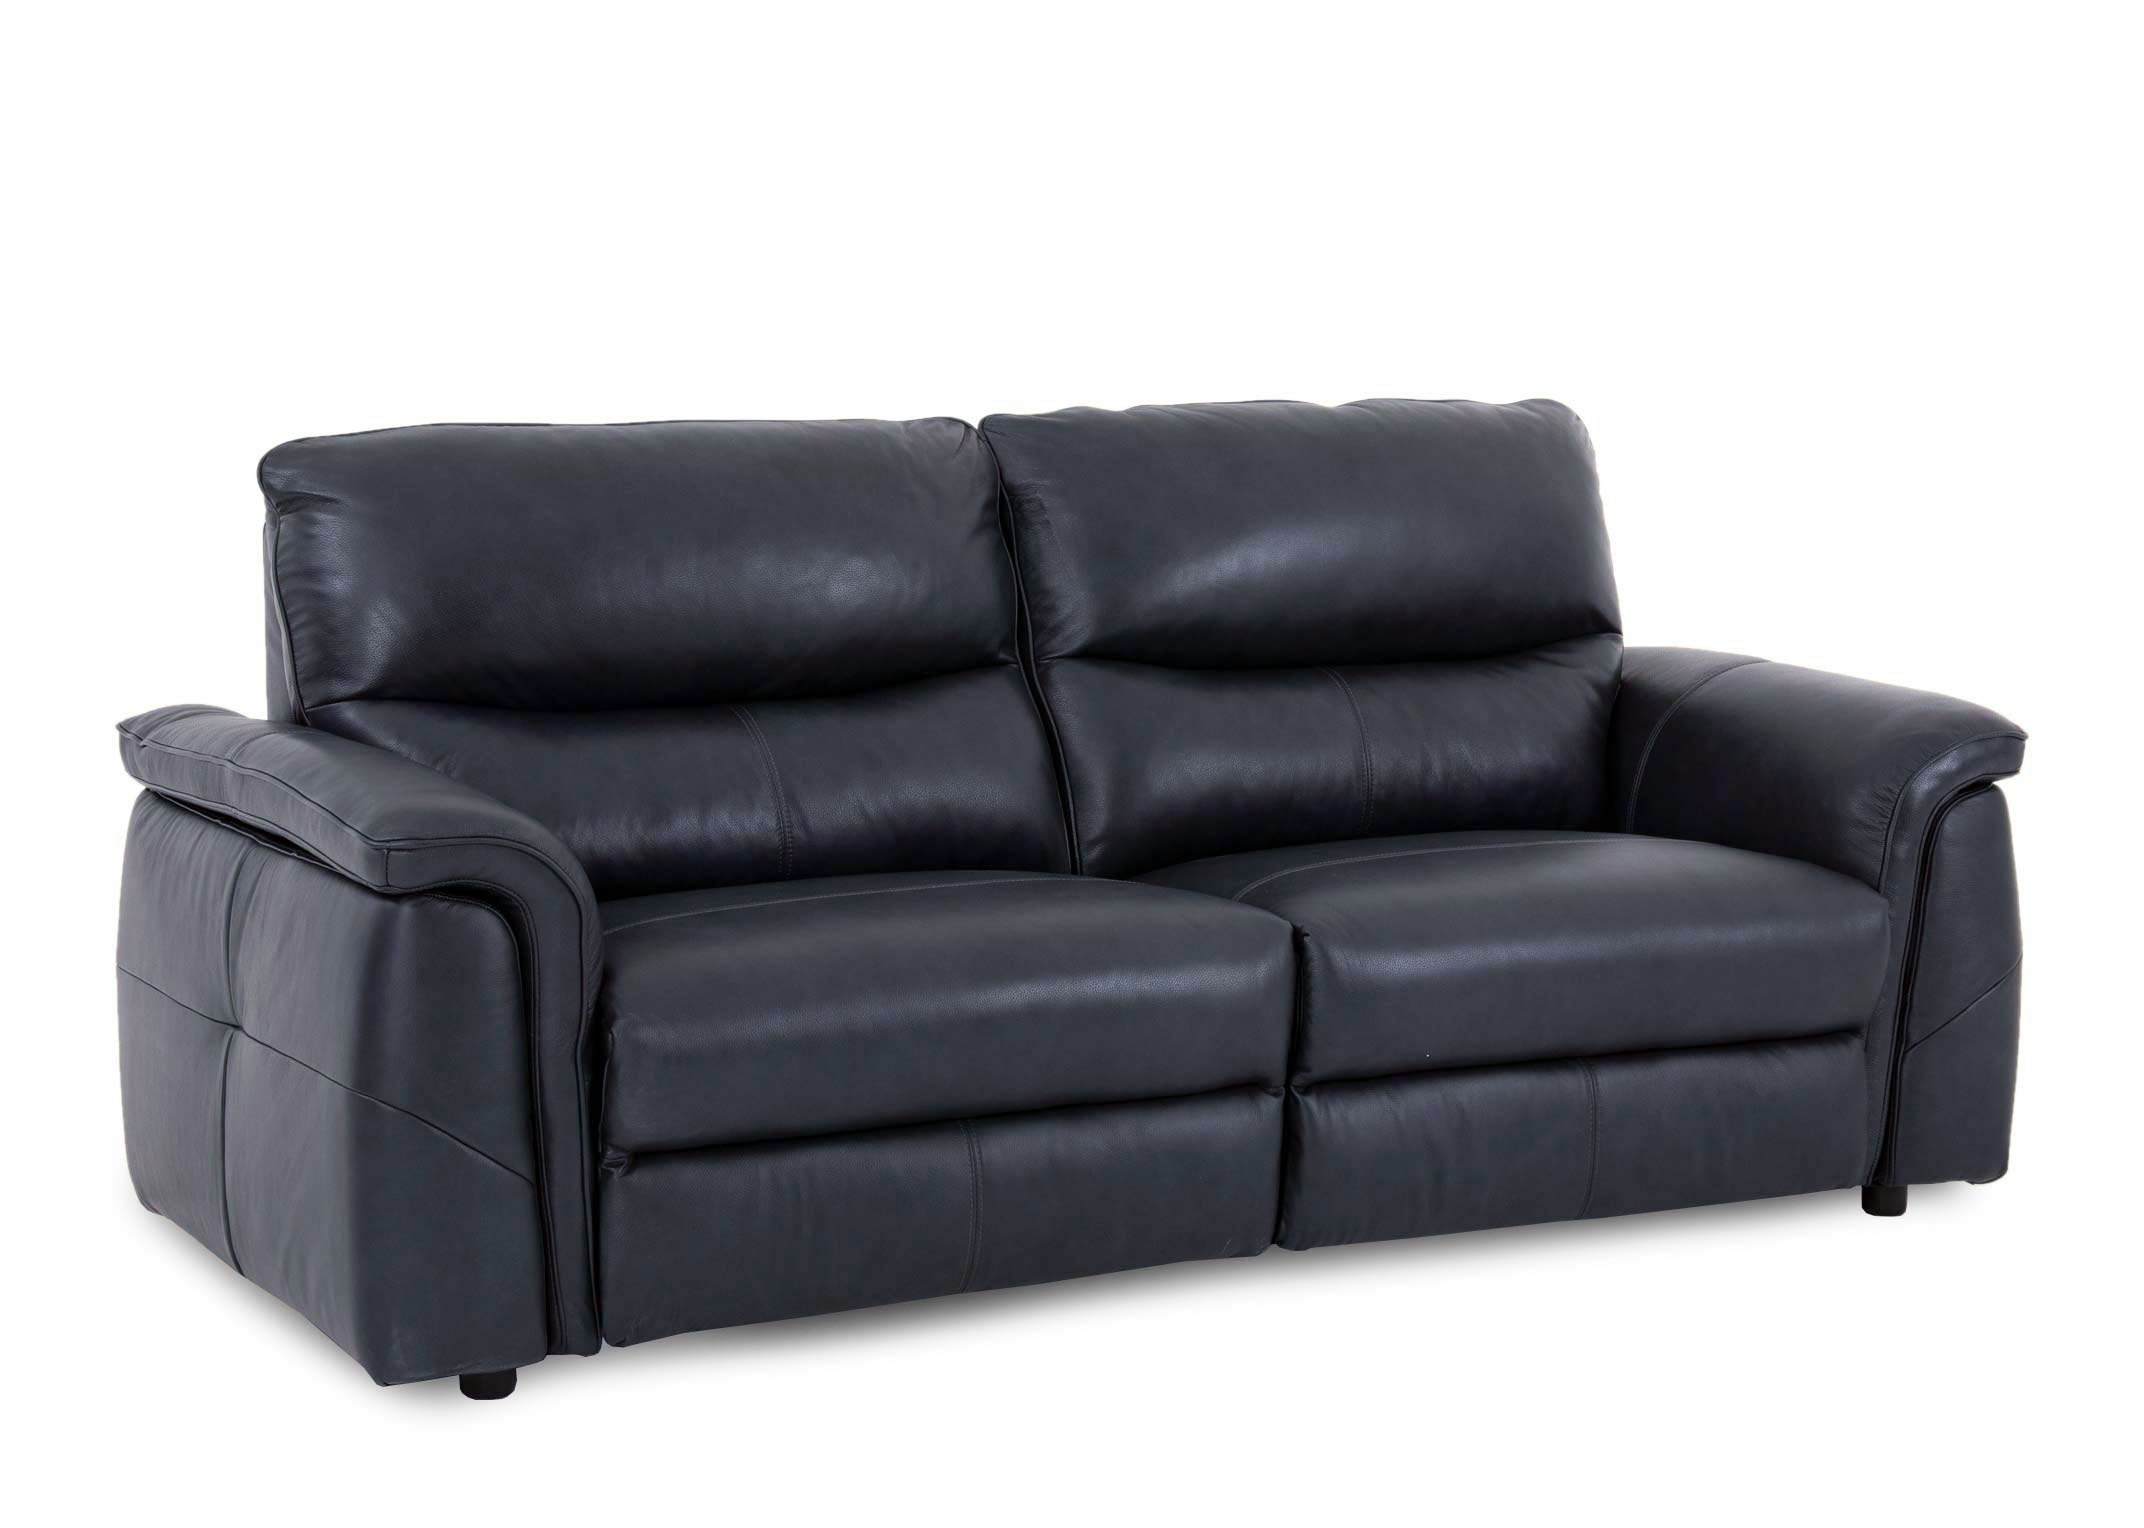 2 5 Seater Navy Leather Power Recliner